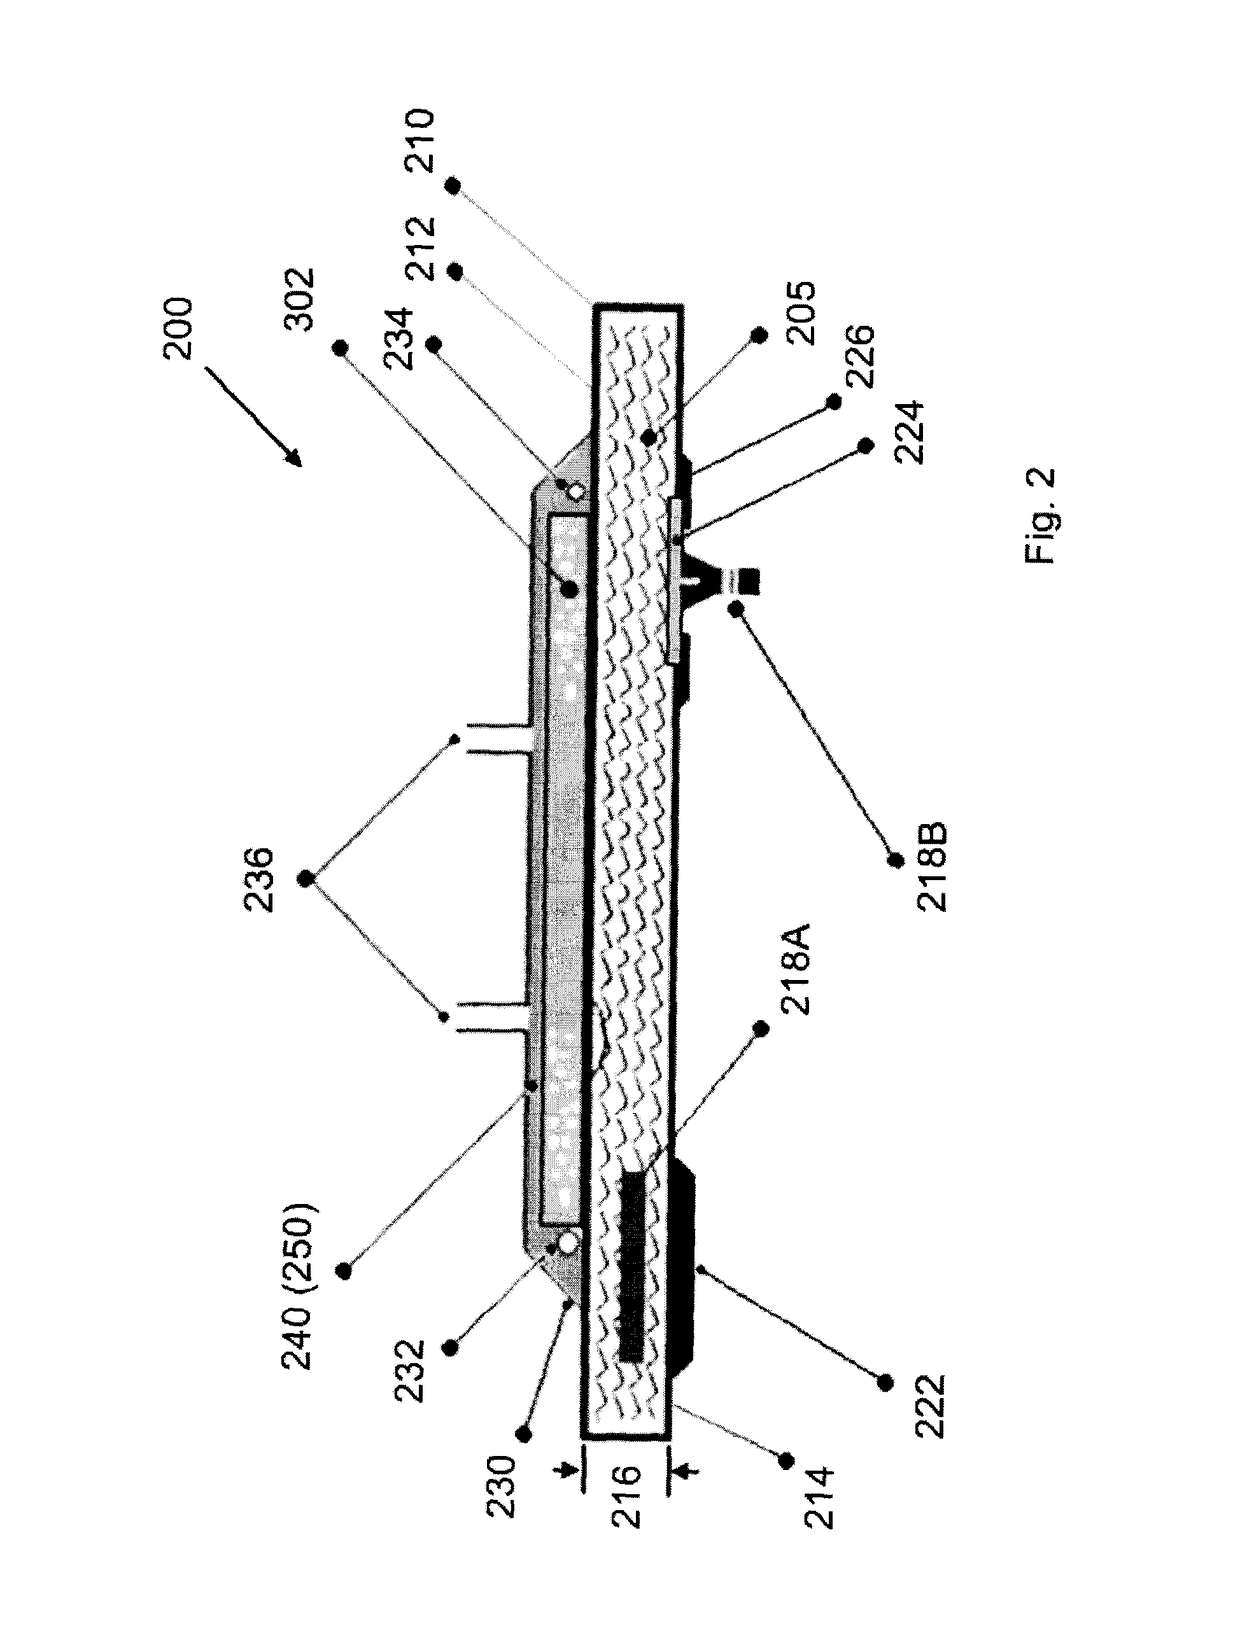 Process and apparatus for molding composite articles